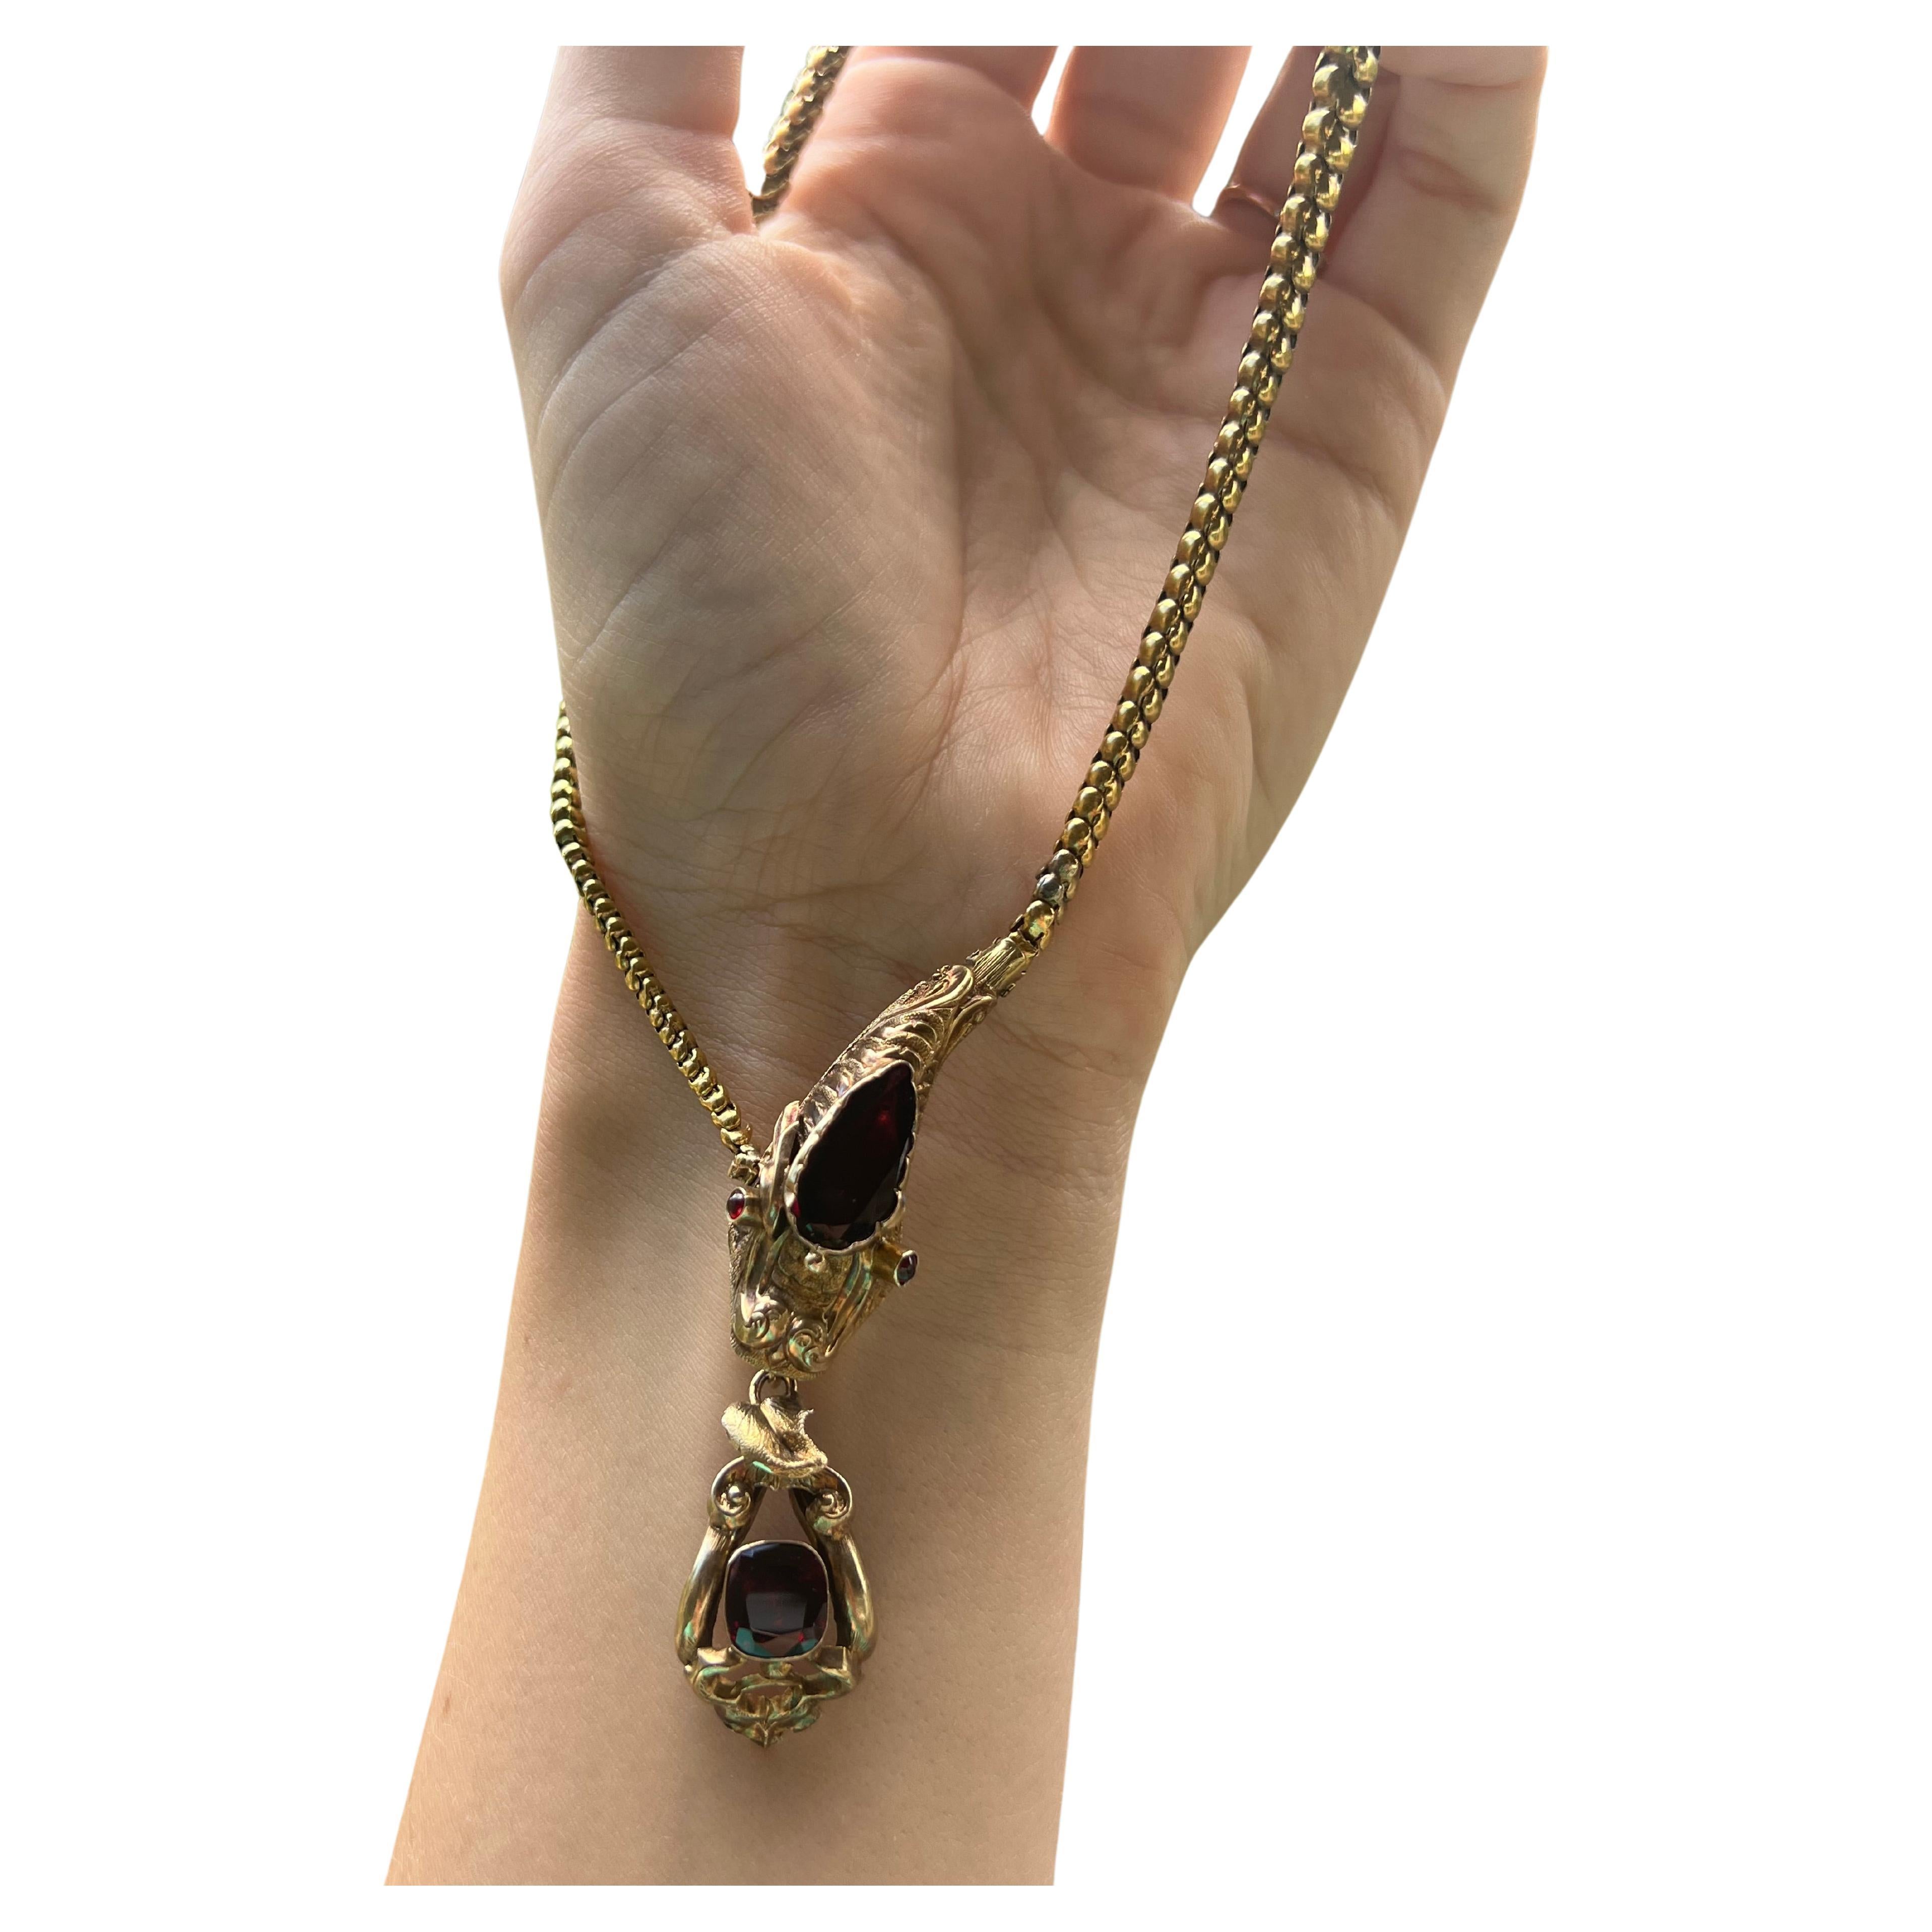 AN ANTIQUE VICTORIAN GARNET SET SNAKE NECKLACE. This necklace is in great condition and has beautiful features through the necklace.  The snake head set with a pear shaped garnet, an antique cushion cut, and two round cabochon cut garnet accent